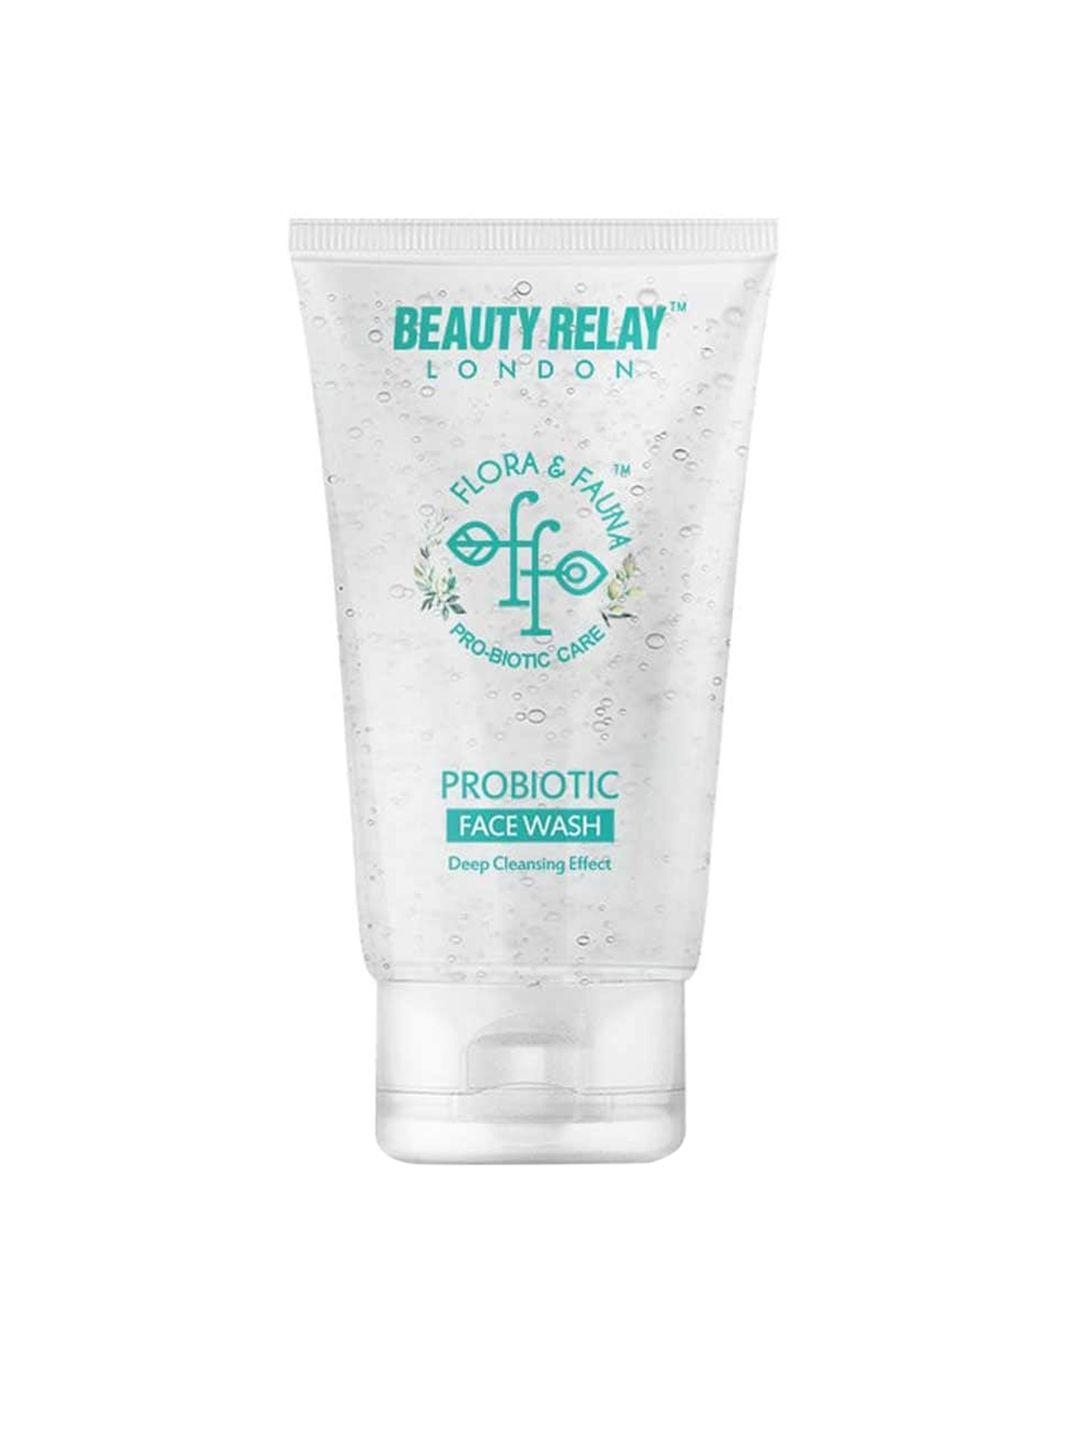 beautyrelay london flora & fauna probiotic face wash with british rose 200ml